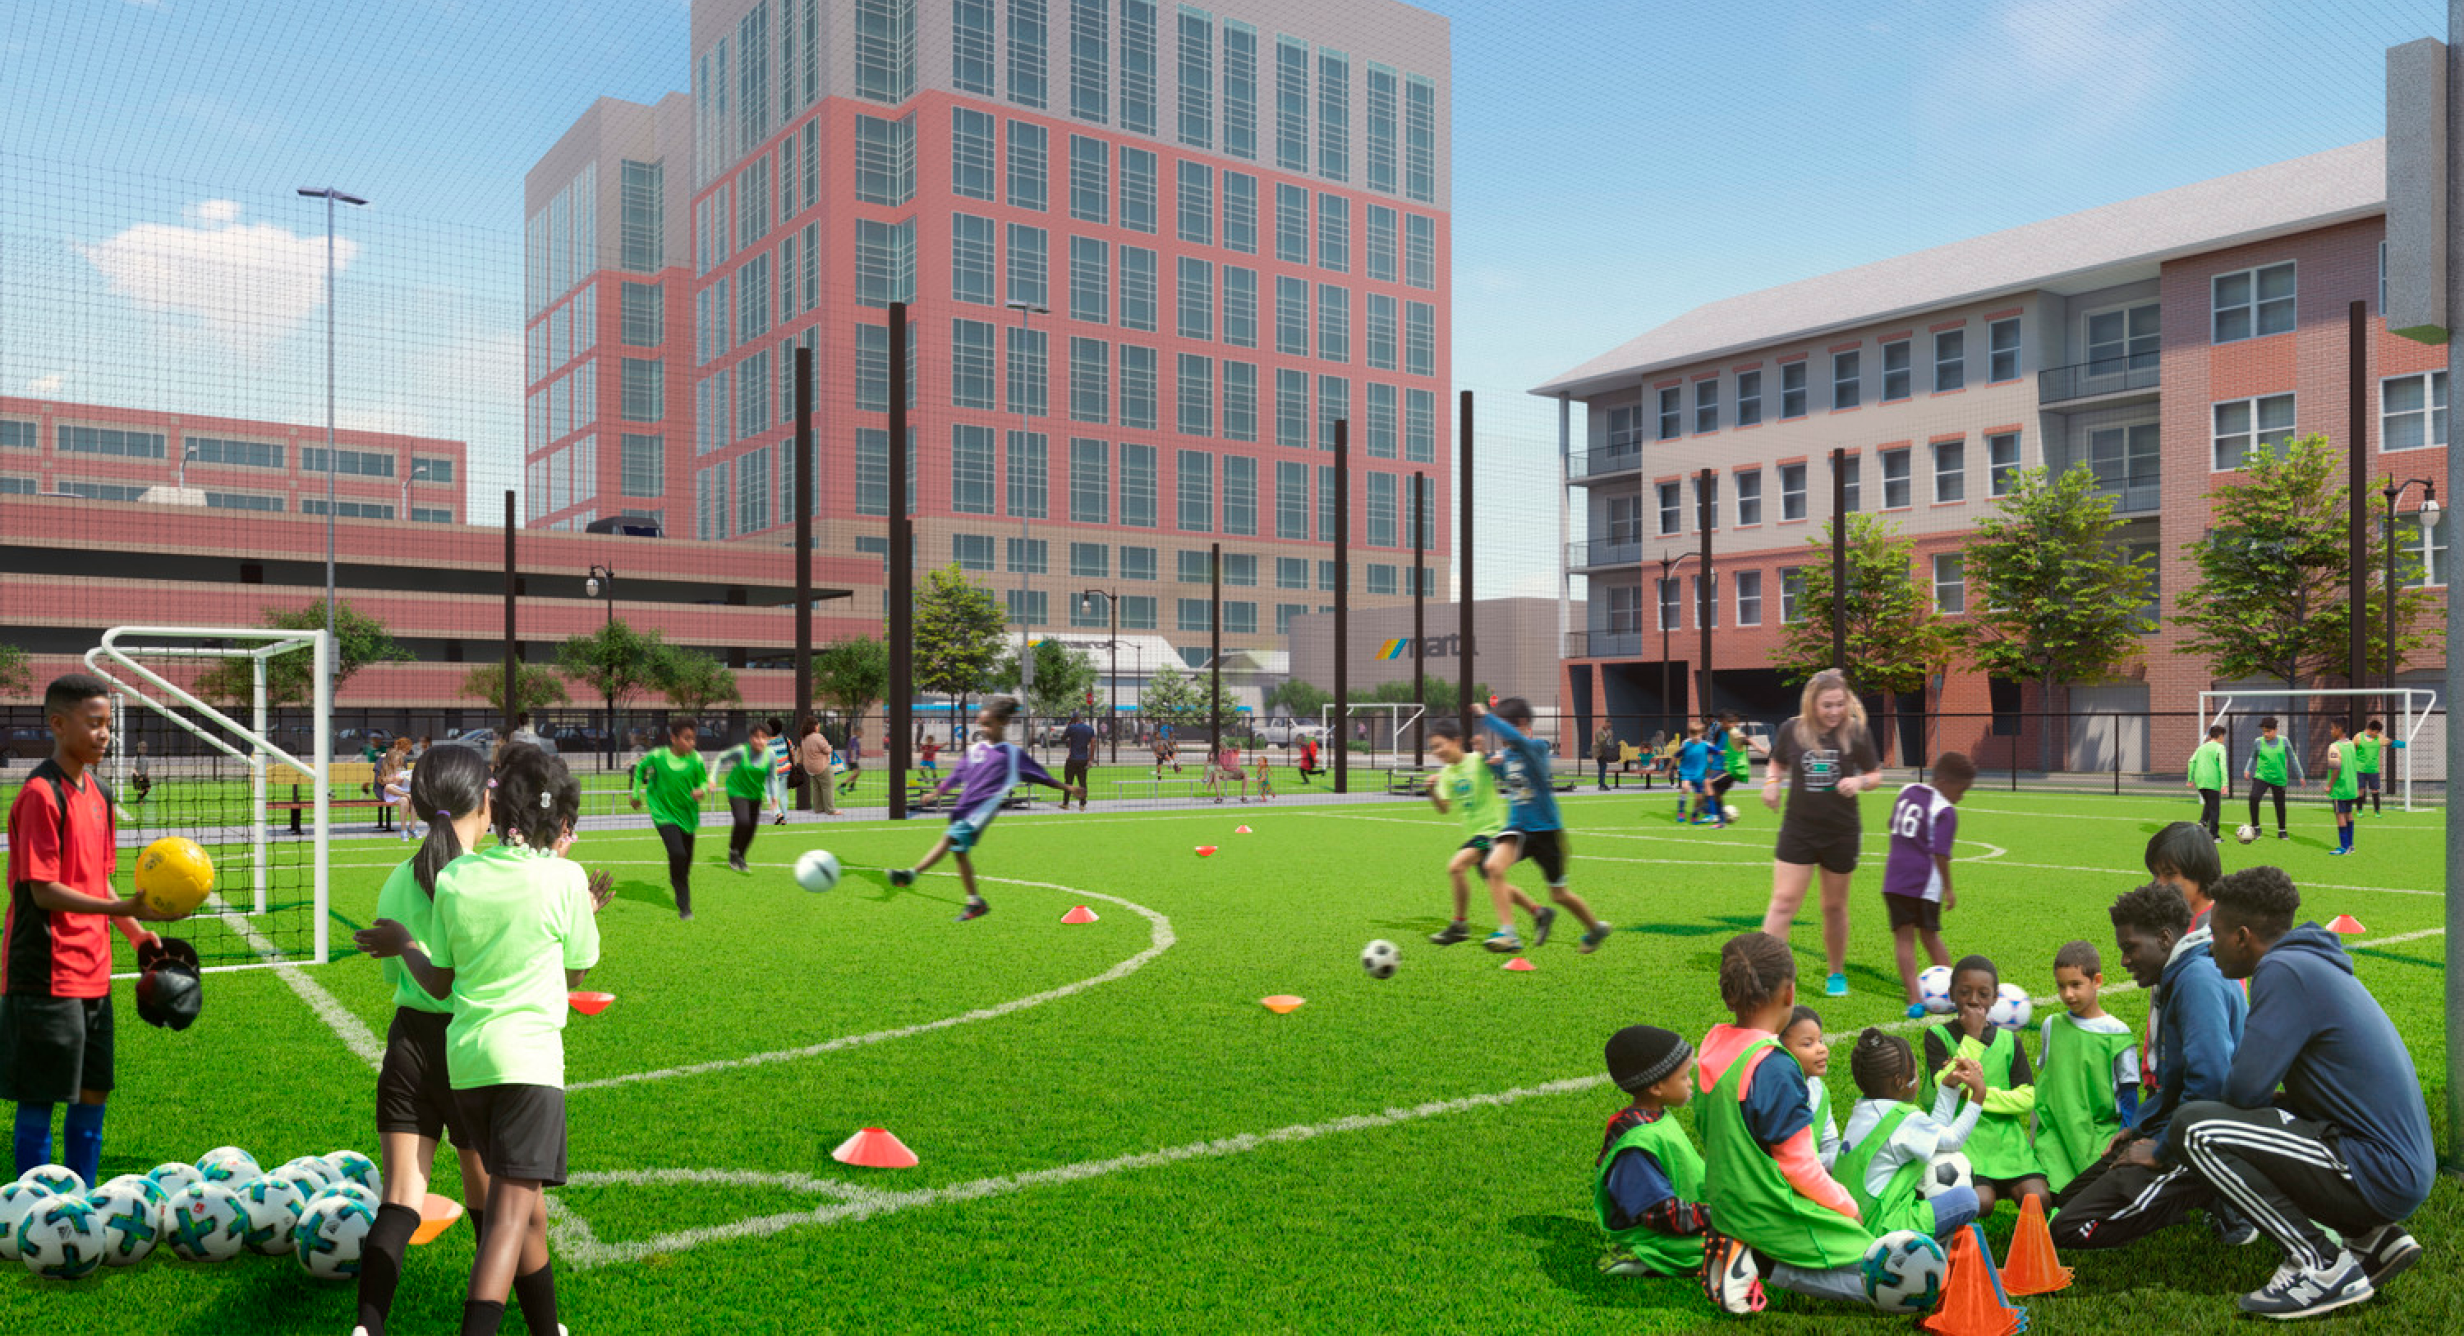 StationSoccer: In Atlanta, a Multi-site Transit Oriented Development Initiative Takes on the Play Equity Gap